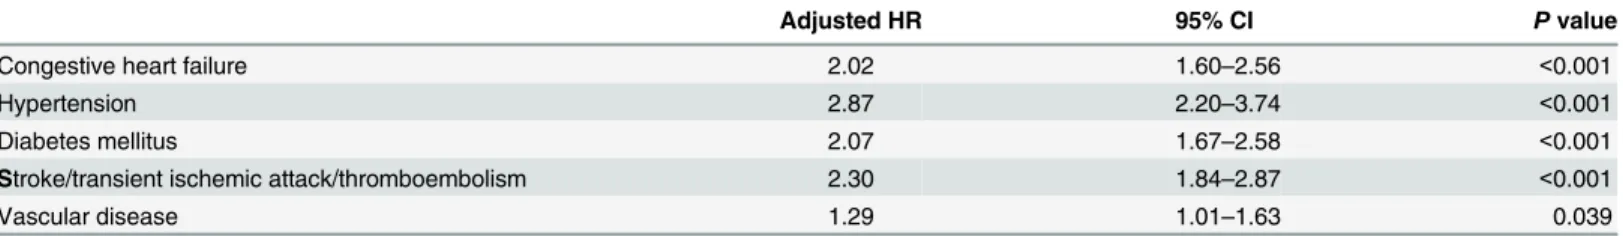 Table 8. Hazard ratios of individual comorbidity of the CHA2DS2 score for mortality in incident hemodialysis patients.